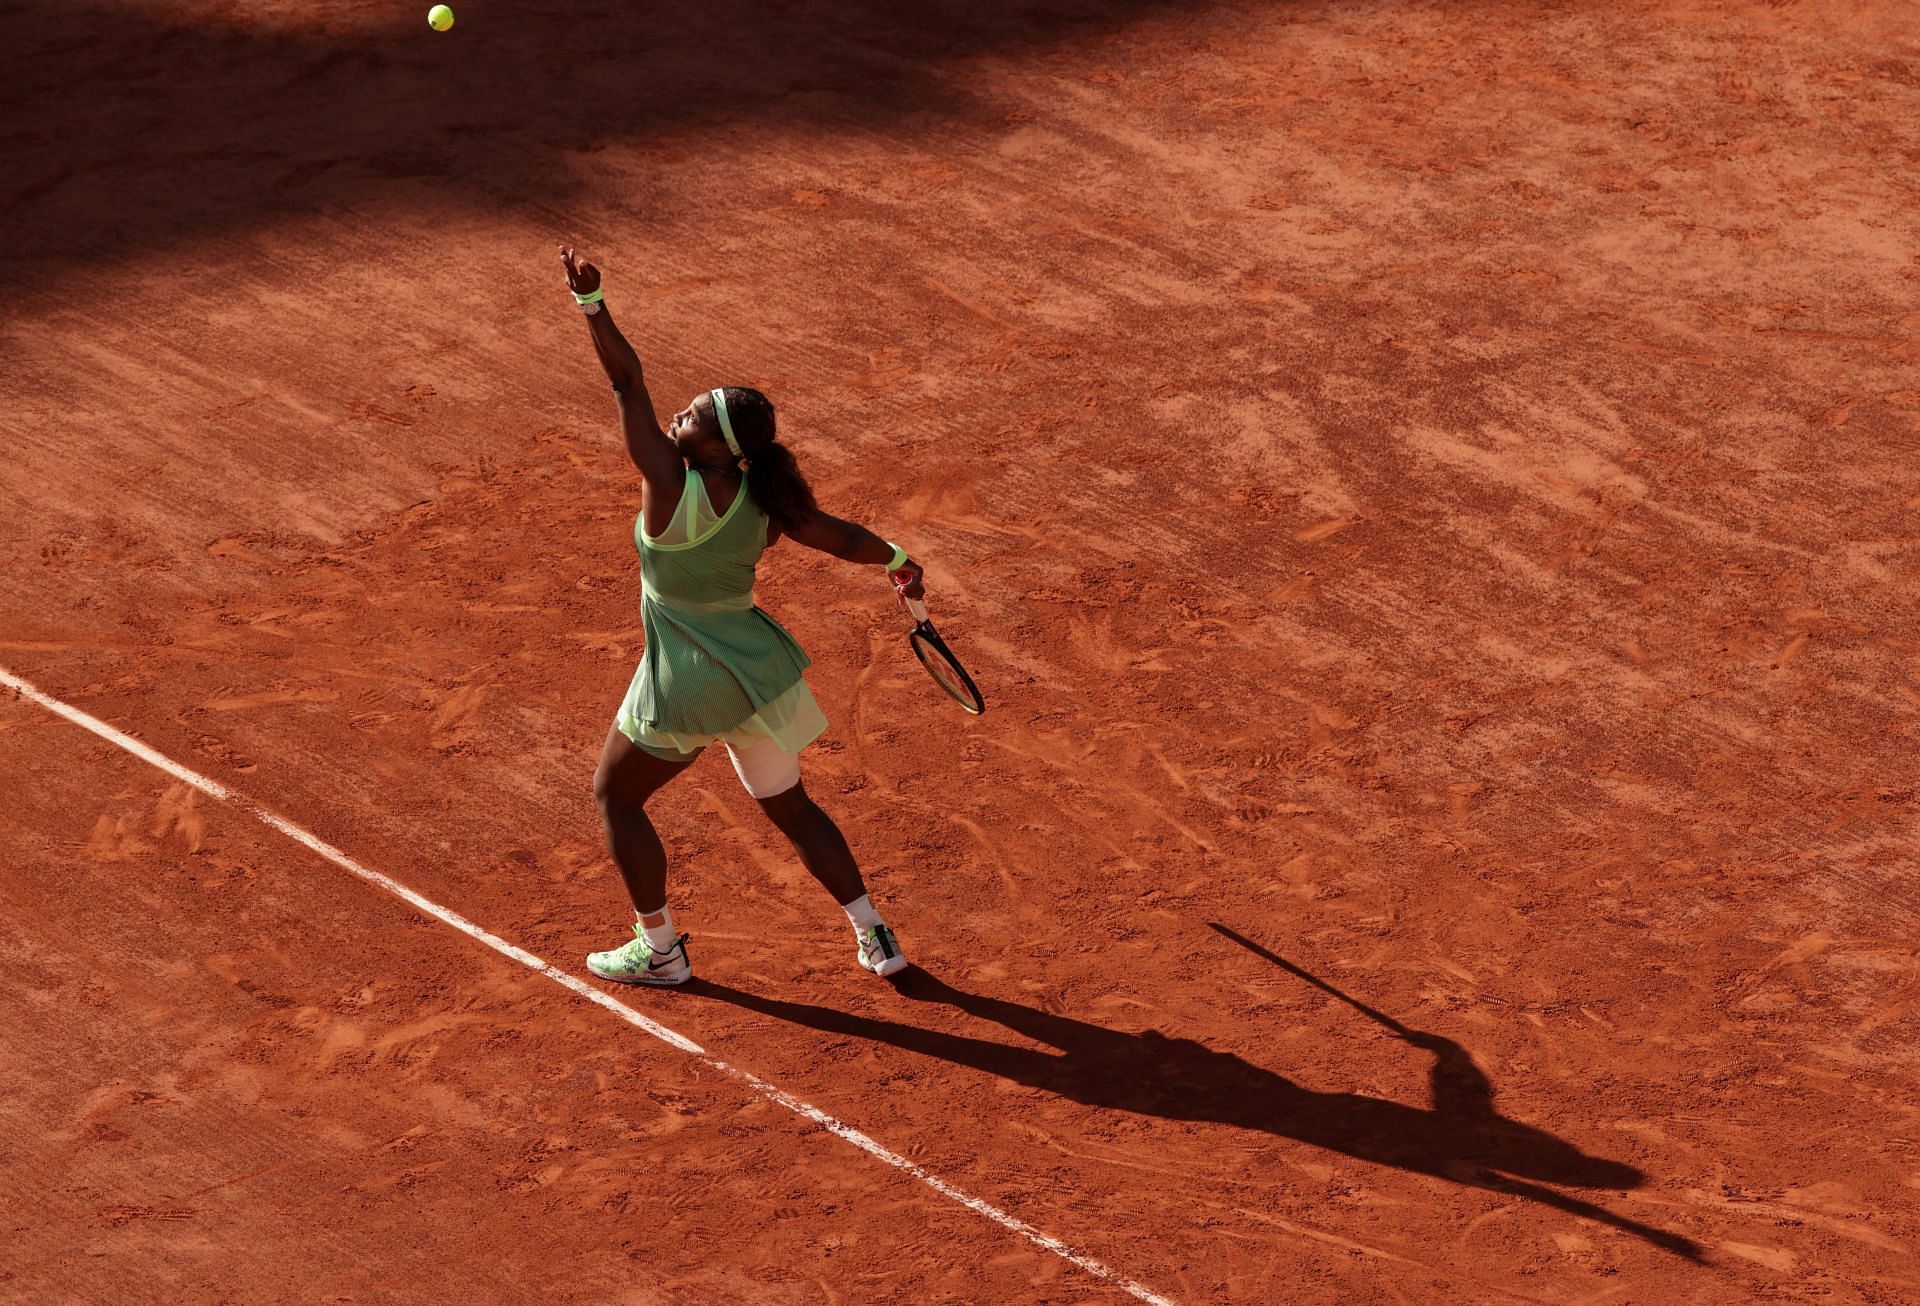 Serena Williams at the 2021 French Open